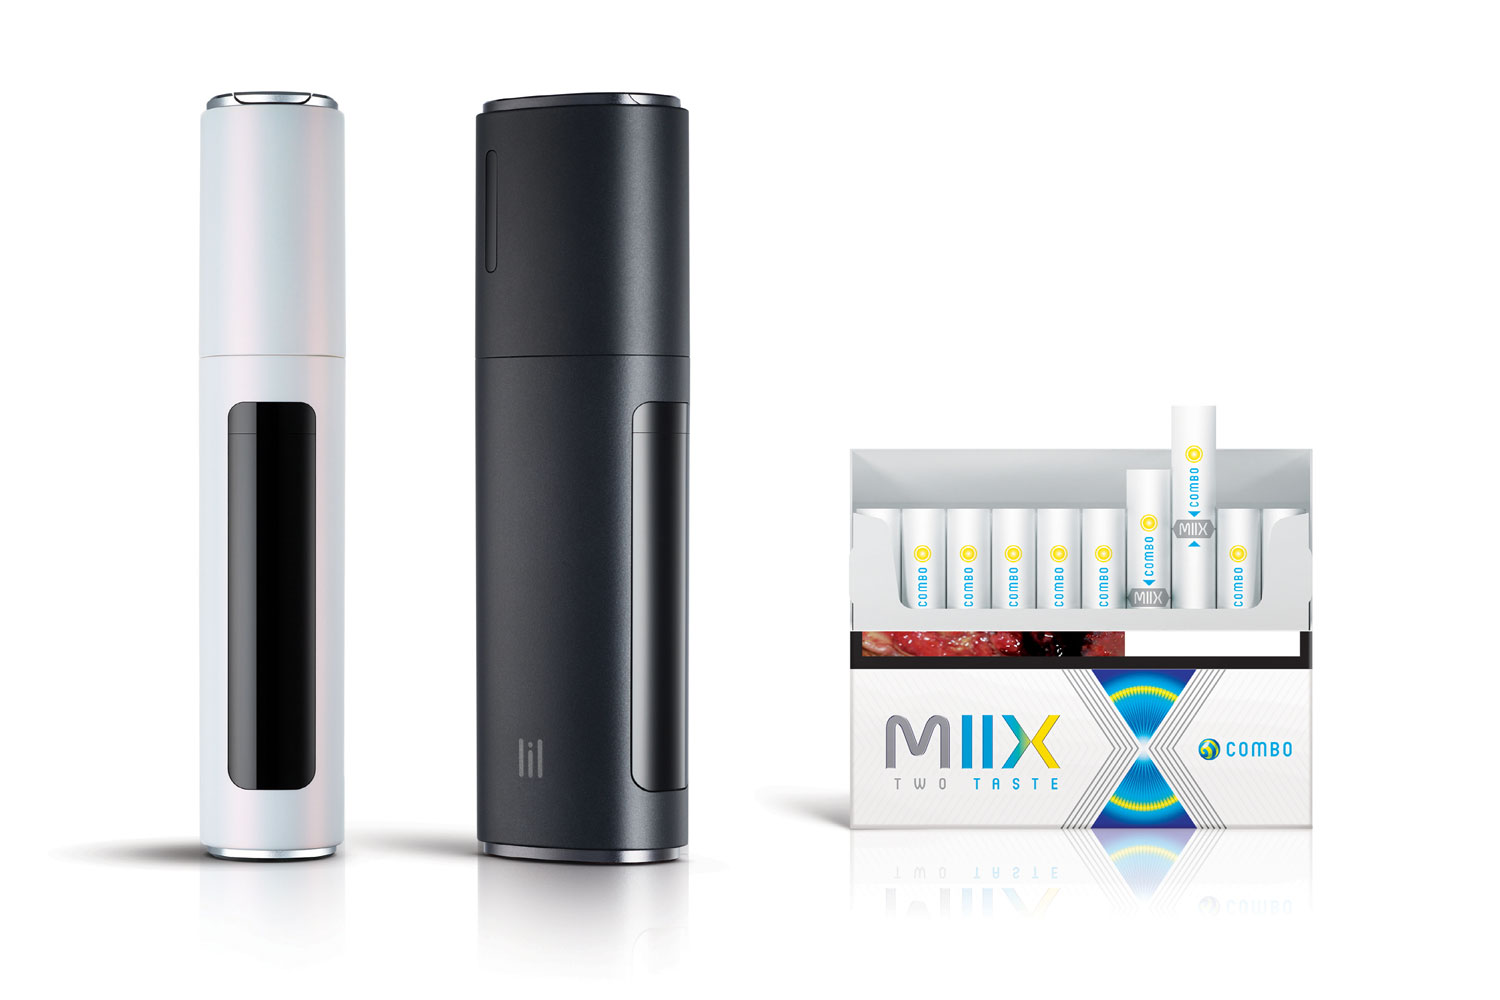 KT&G Launches Miix Combo - Tobacco Reporter